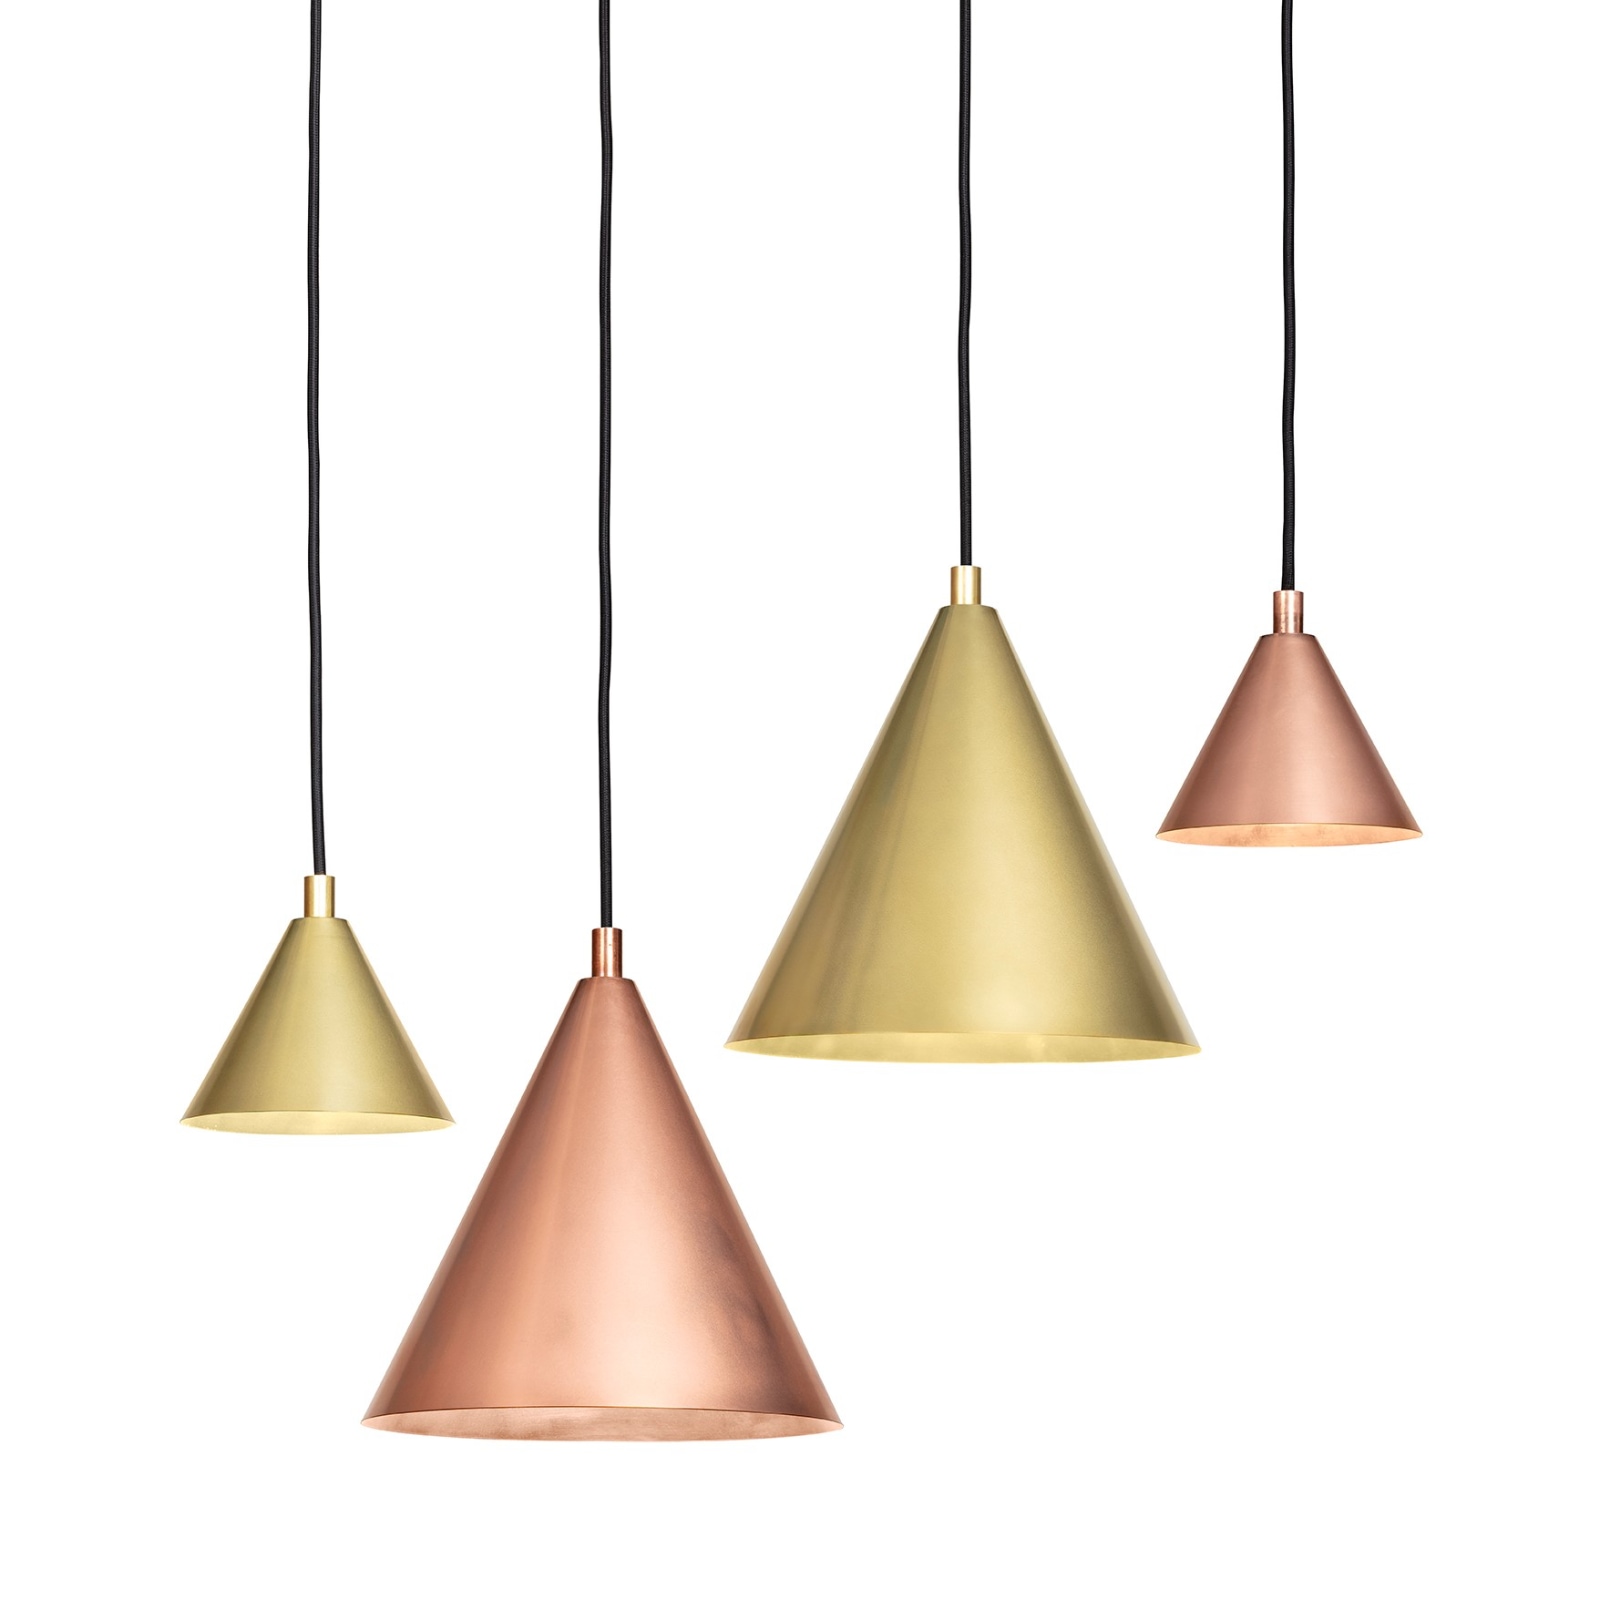 Conic Shaped Copper and Brass Pendant Light TRATTEN 